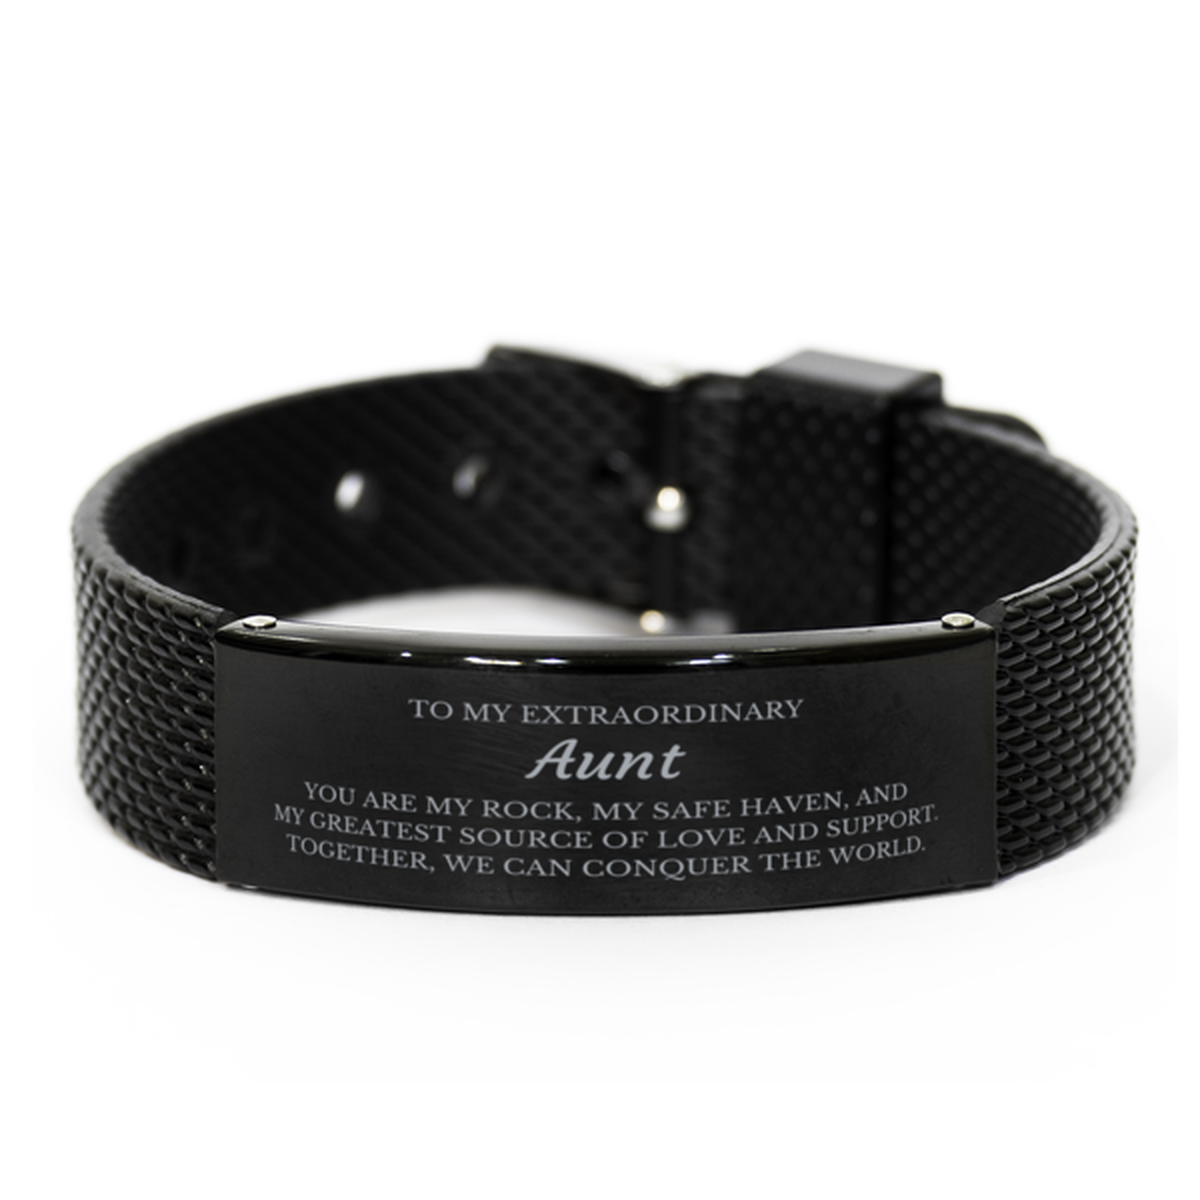 To My Extraordinary Aunt Gifts, Together, we can conquer the world, Birthday Black Shark Mesh Bracelet For Aunt, Christmas Gifts For Aunt